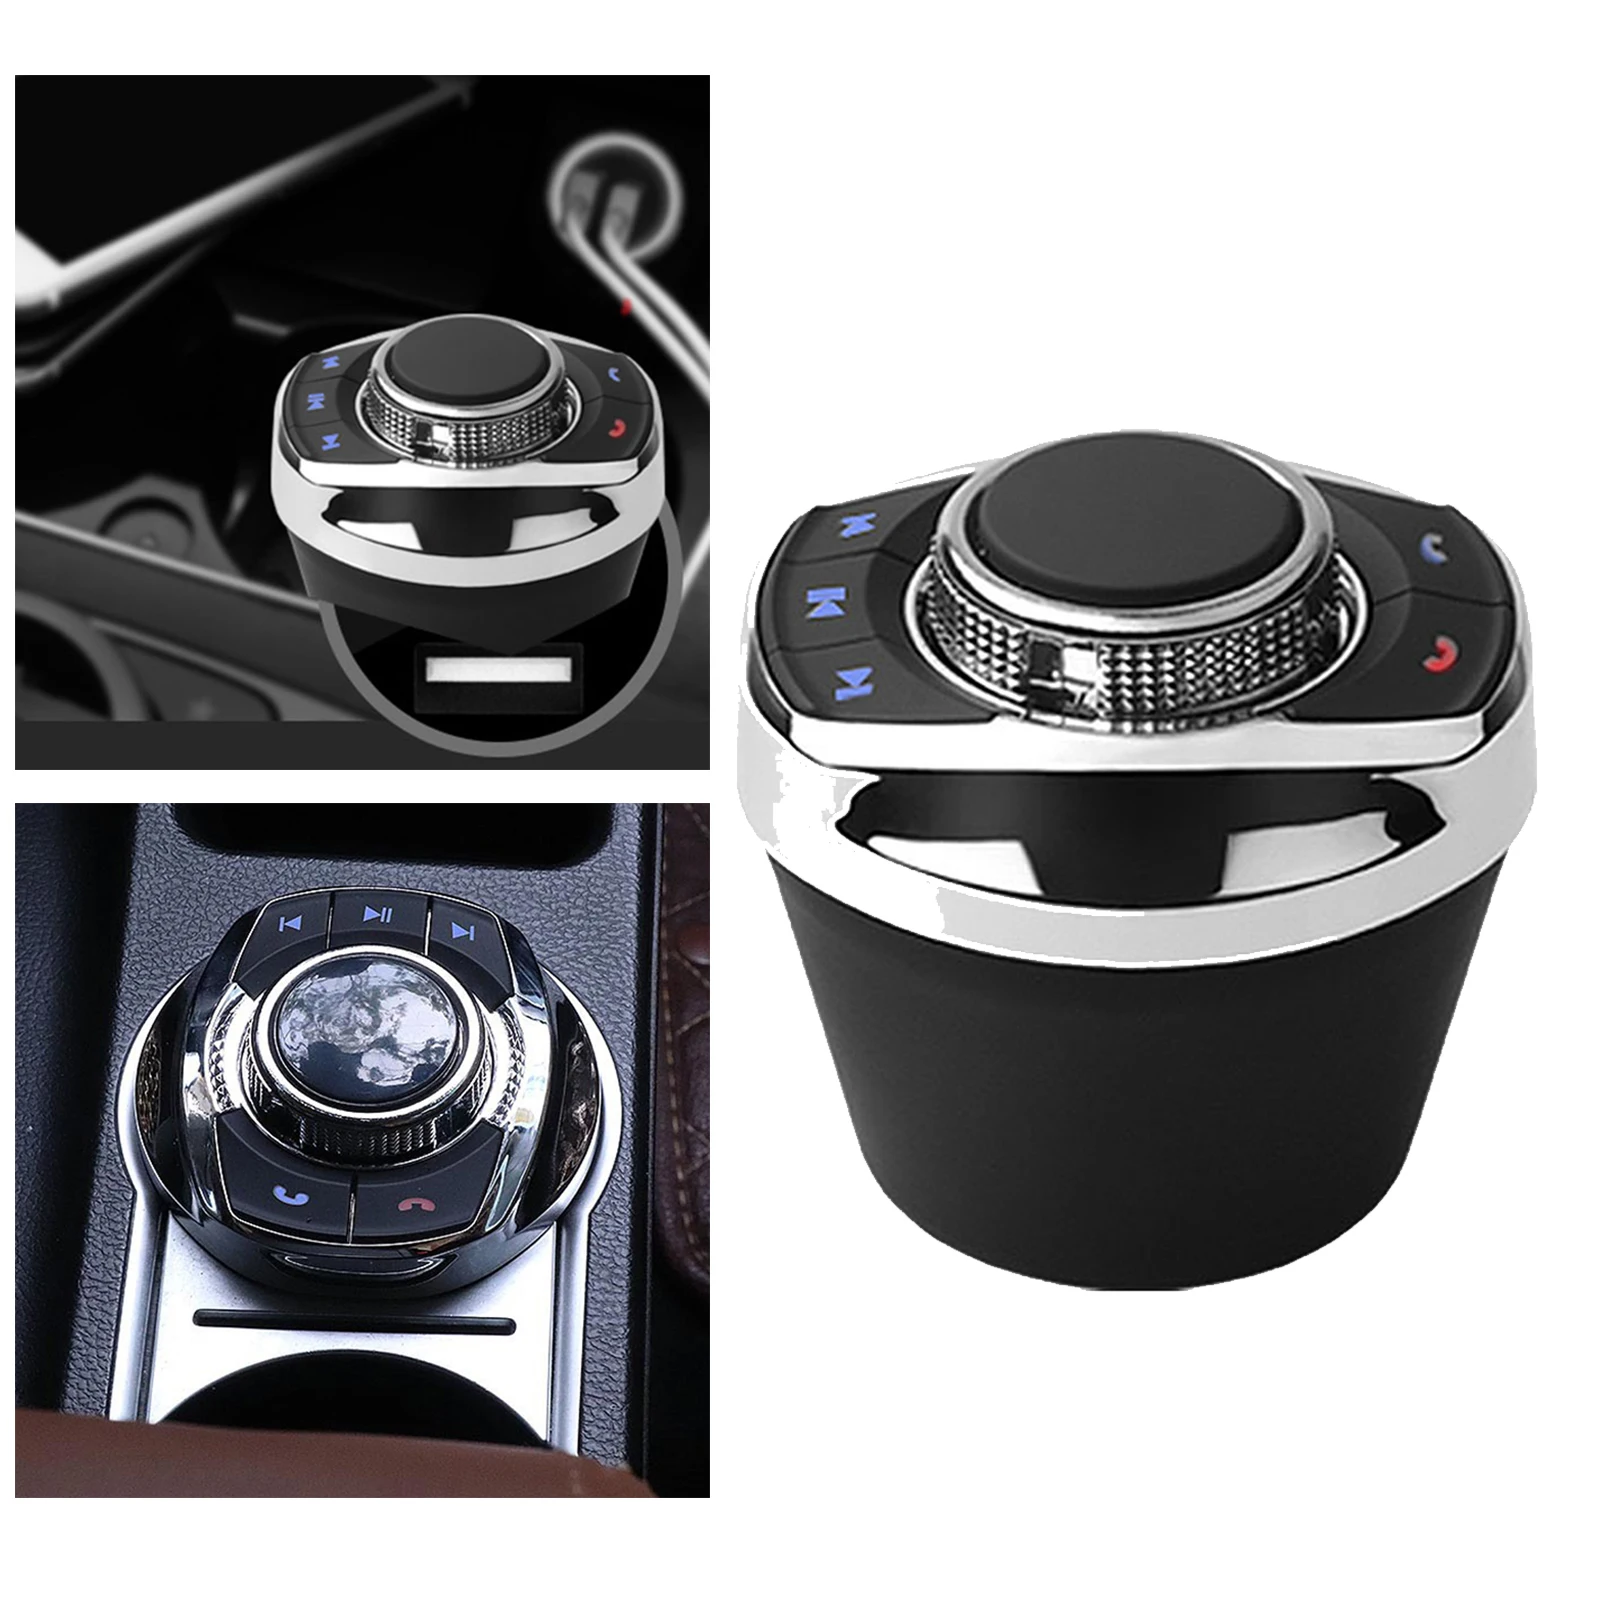 Cup Shape 8 Keys Function Car Wireless Steering Wheel Control Button with LED Light For Car Android Navigation Player